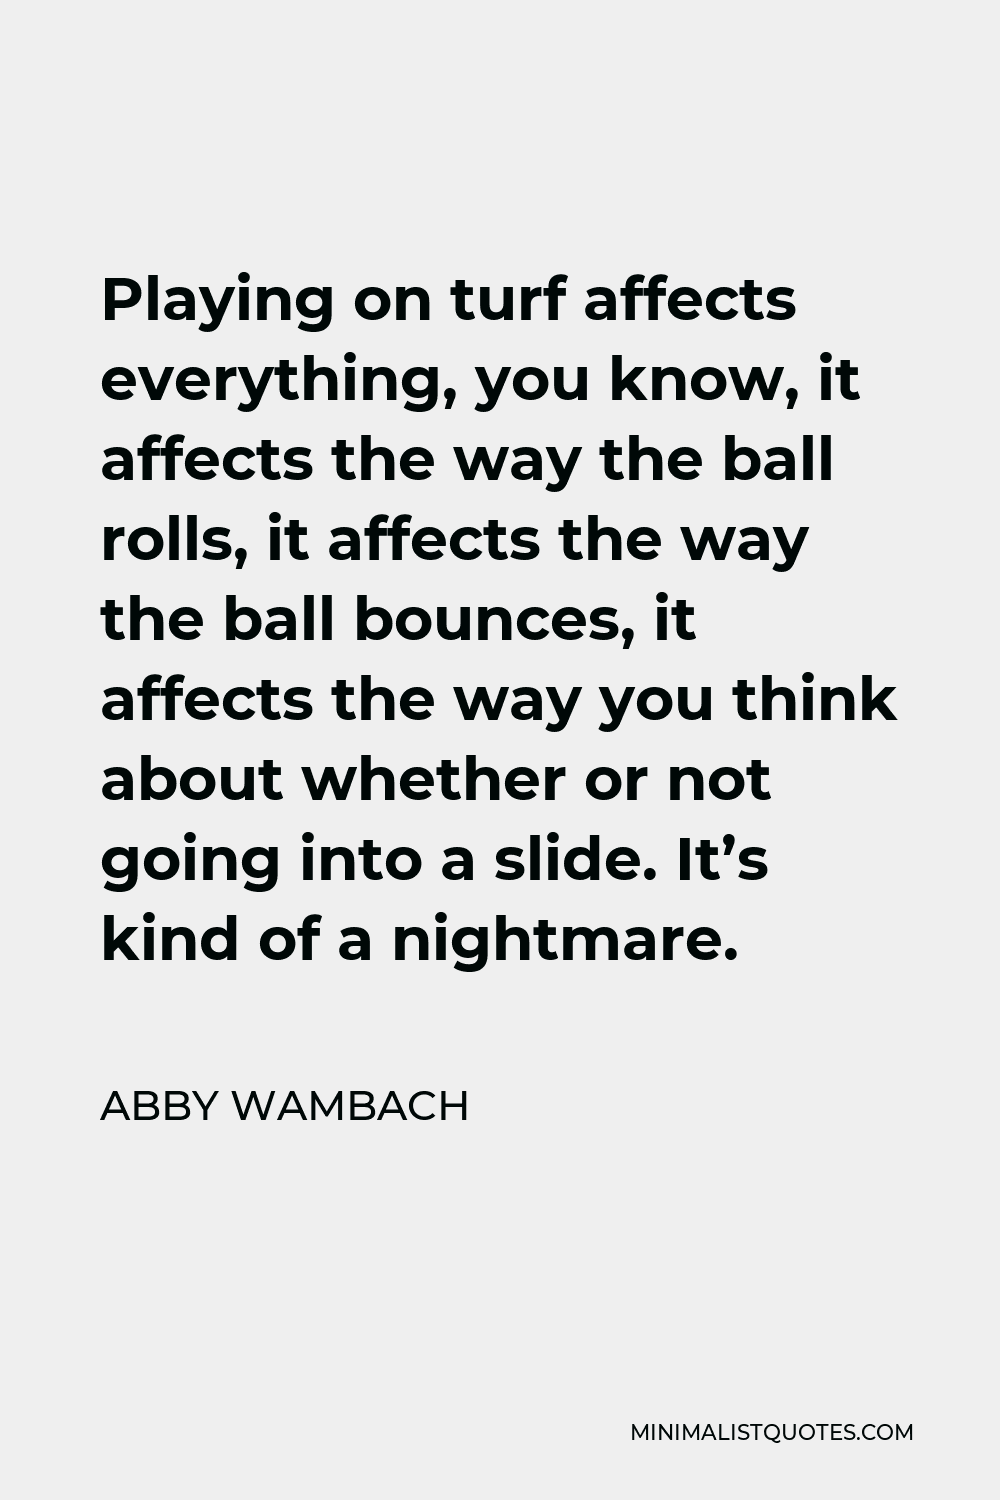 Abby Wambach Quote - Playing on turf affects everything, you know, it affects the way the ball rolls, it affects the way the ball bounces, it affects the way you think about whether or not going into a slide. It’s kind of a nightmare.